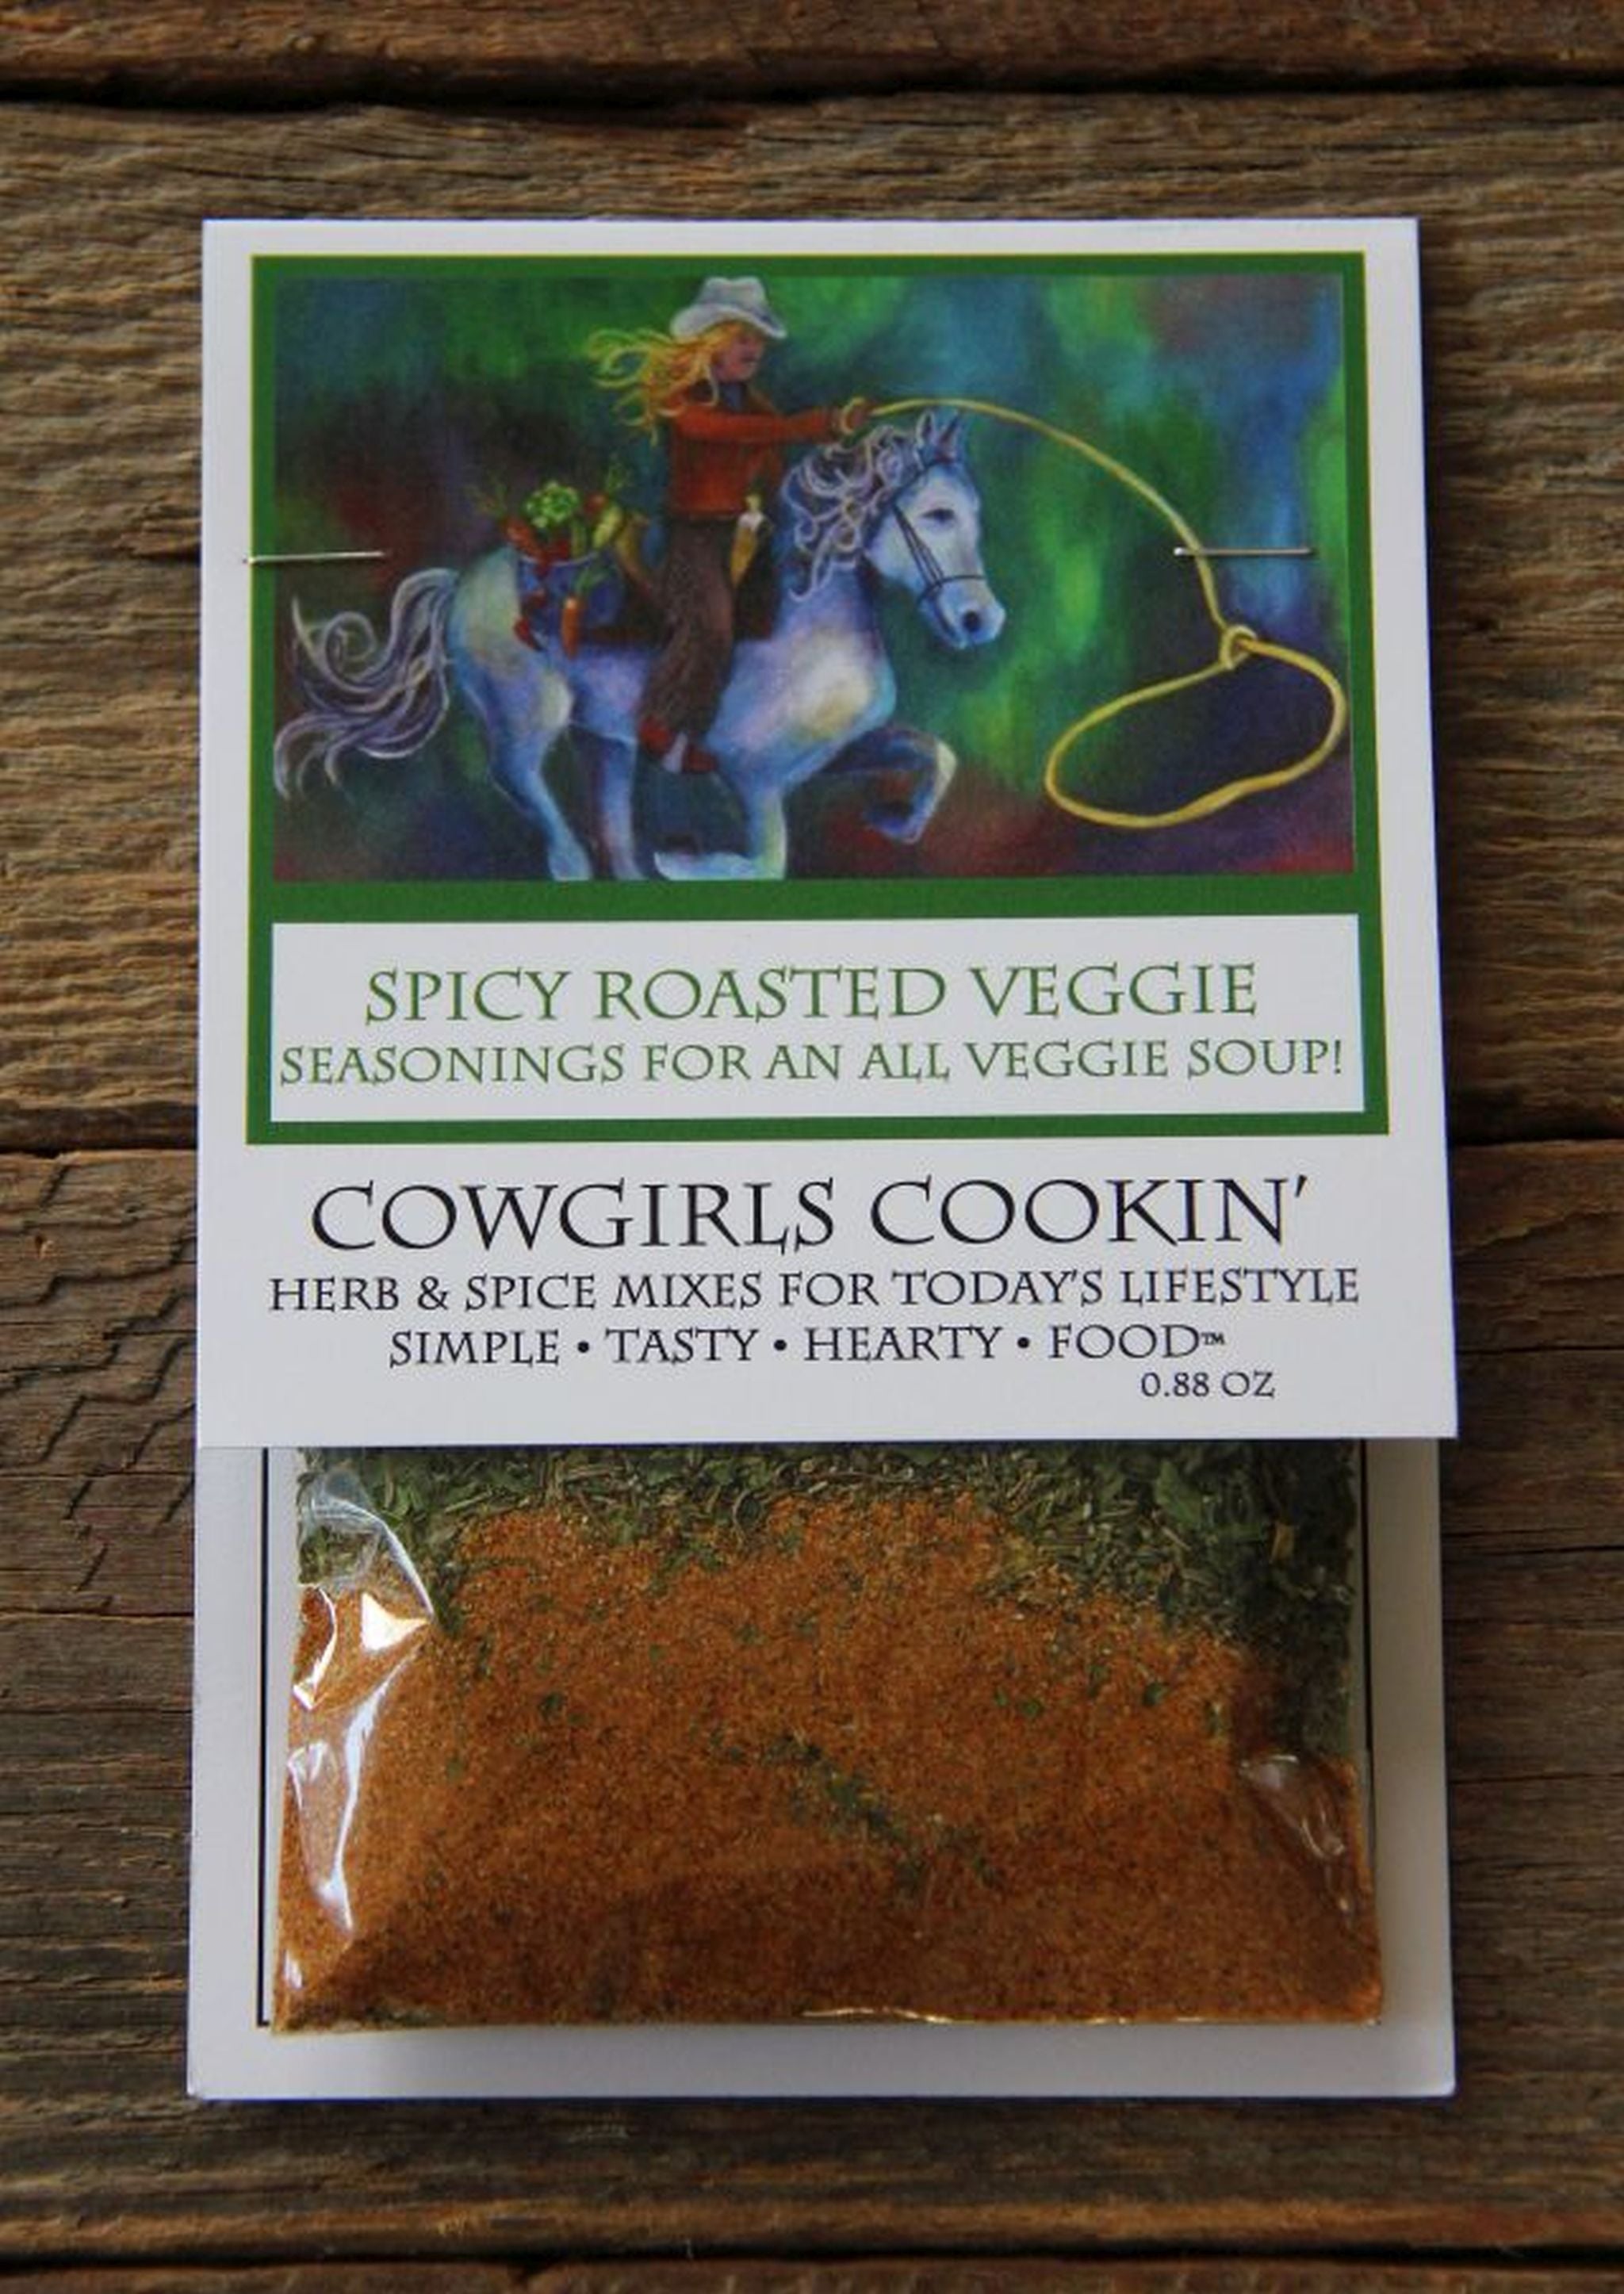 Cowgirls Cookin', vegetarian soup, vegetarian soup recipes, roasted vegetables, roasted veggies, great vegetarian soup recipes, roasted veggie recipes, meatless minded, meatless Monday, oven roasted veggies, vegetable soup, easy homemade vegetable soup, soup freezes well 